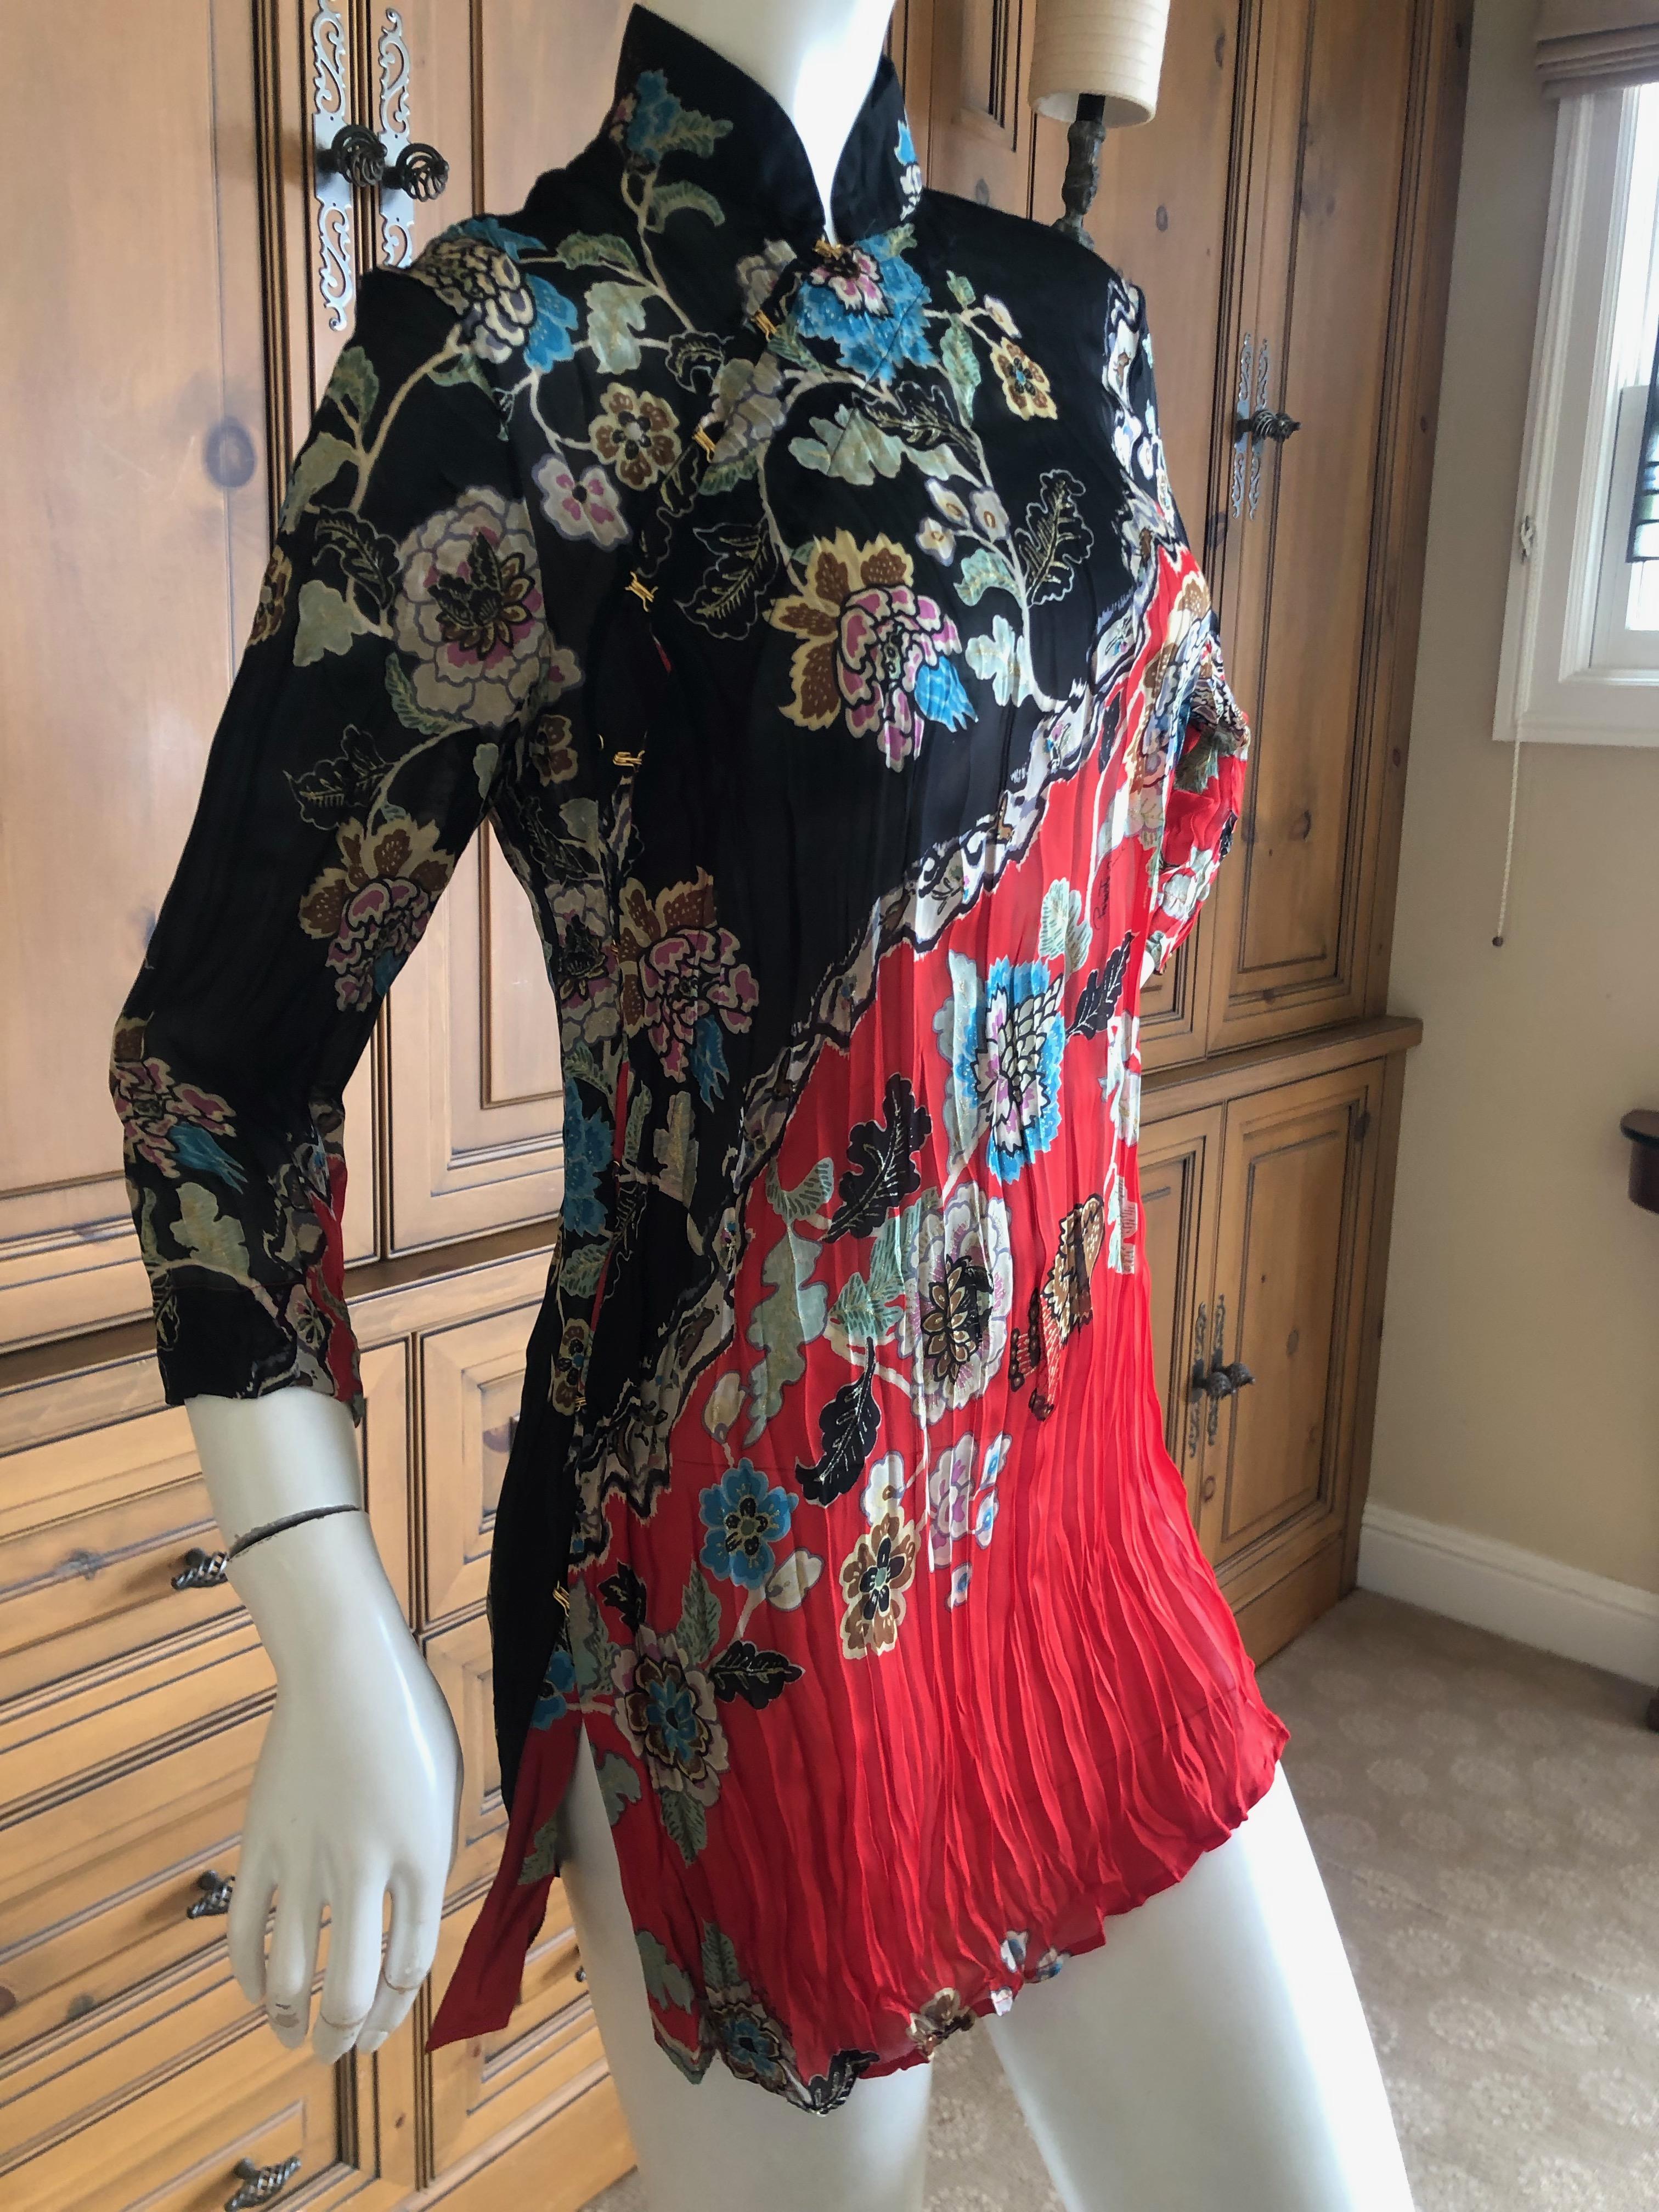 Roberto Cavalli Spring 2003 Pleated Silk Cheongsam Style Floral Tunic
Size XS, but runs large

Bust 37